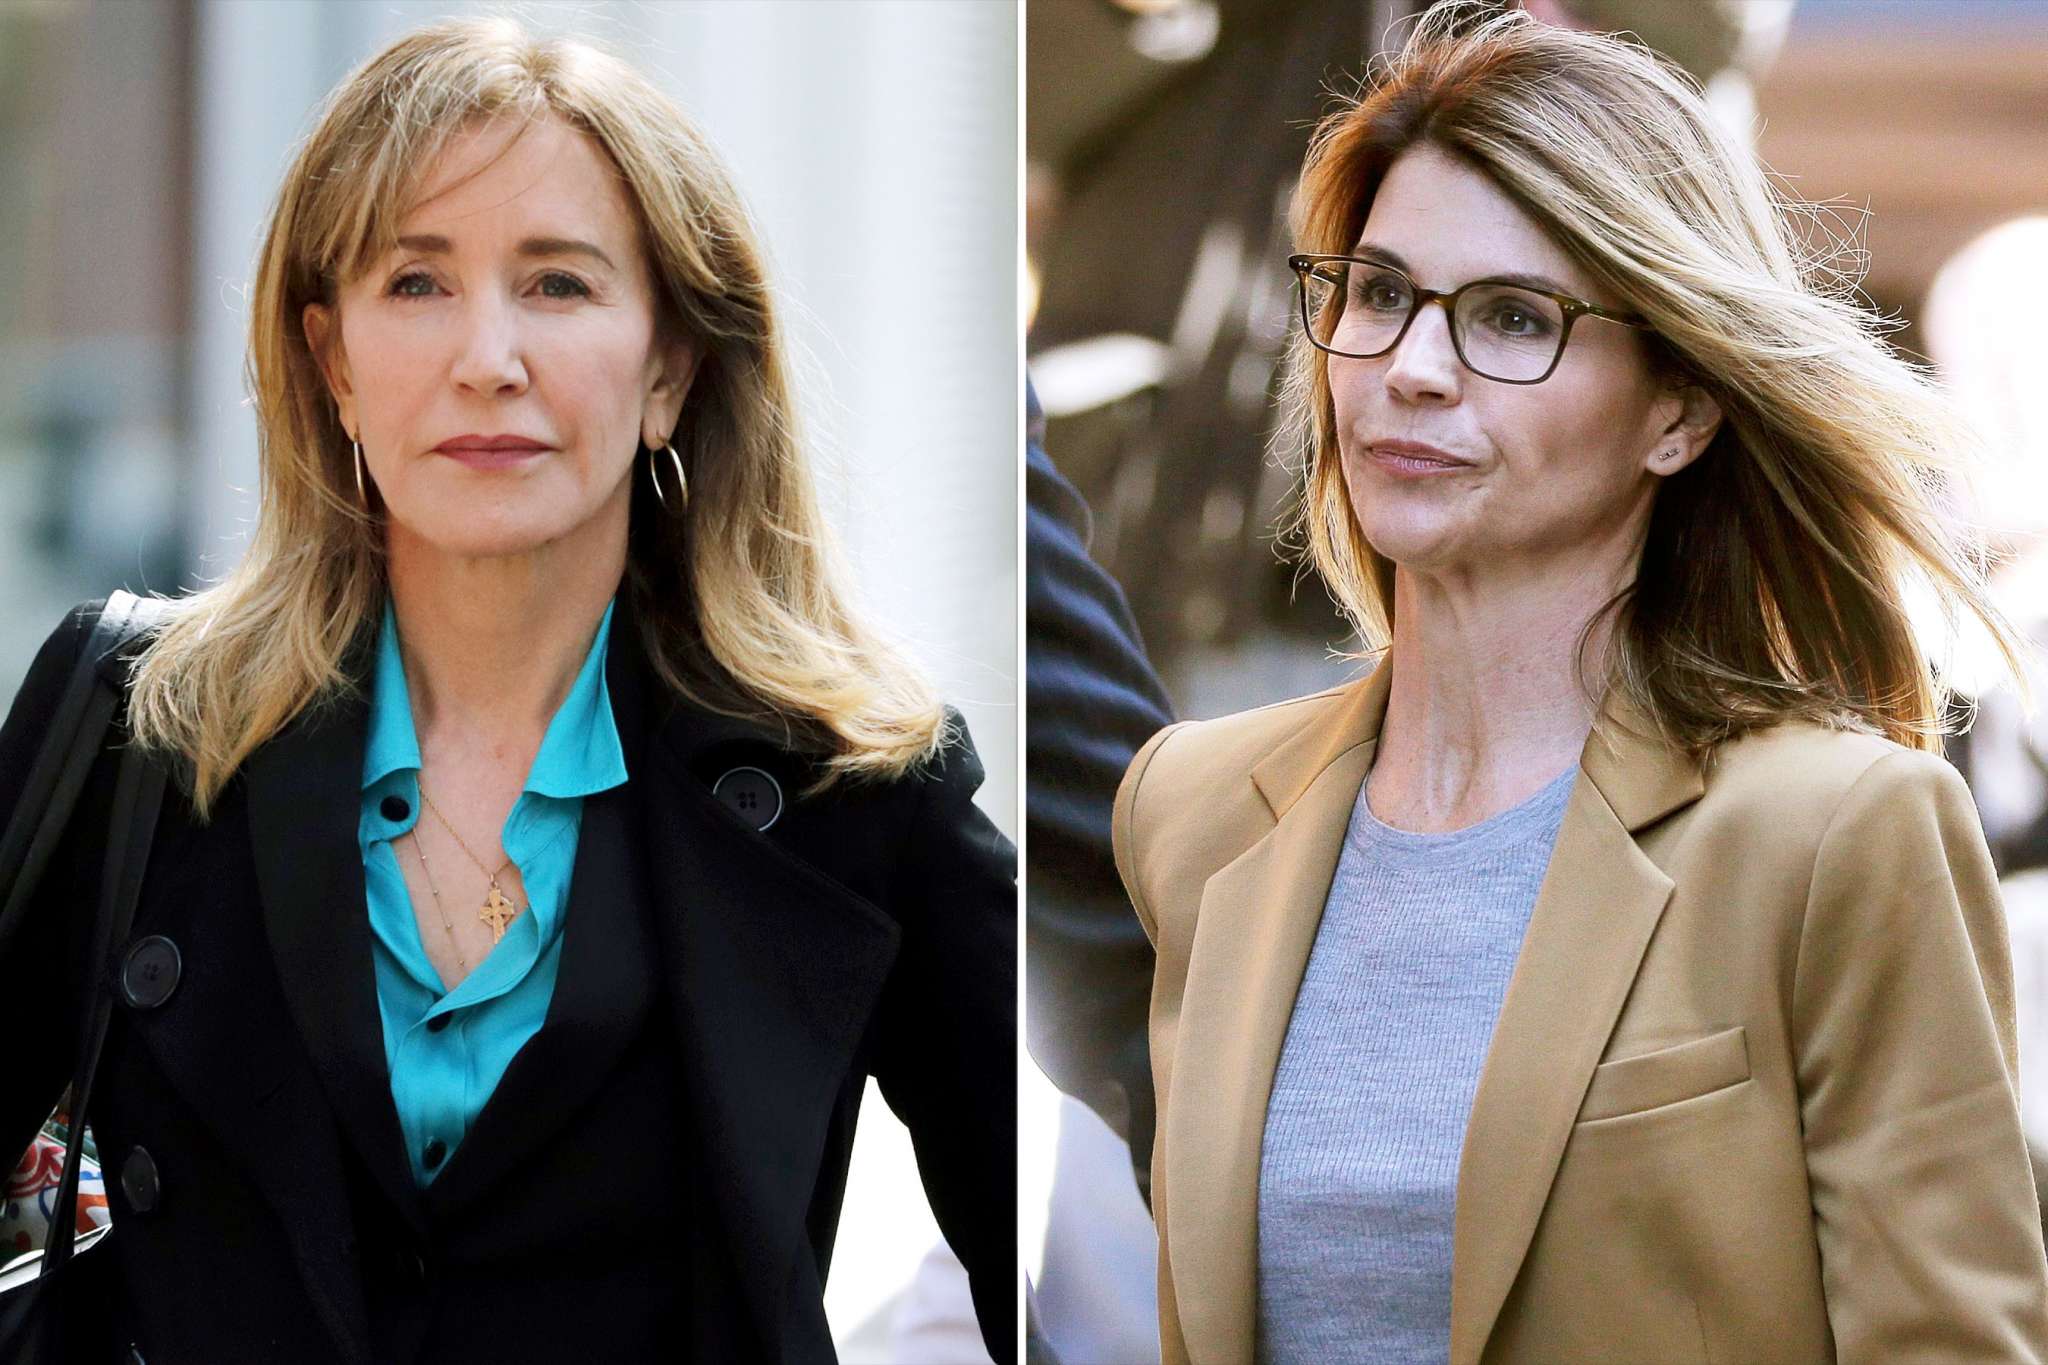 Felicity Huffman Pleads Guilty In College Admissions Scandal What Is Next? | Celebrity ...